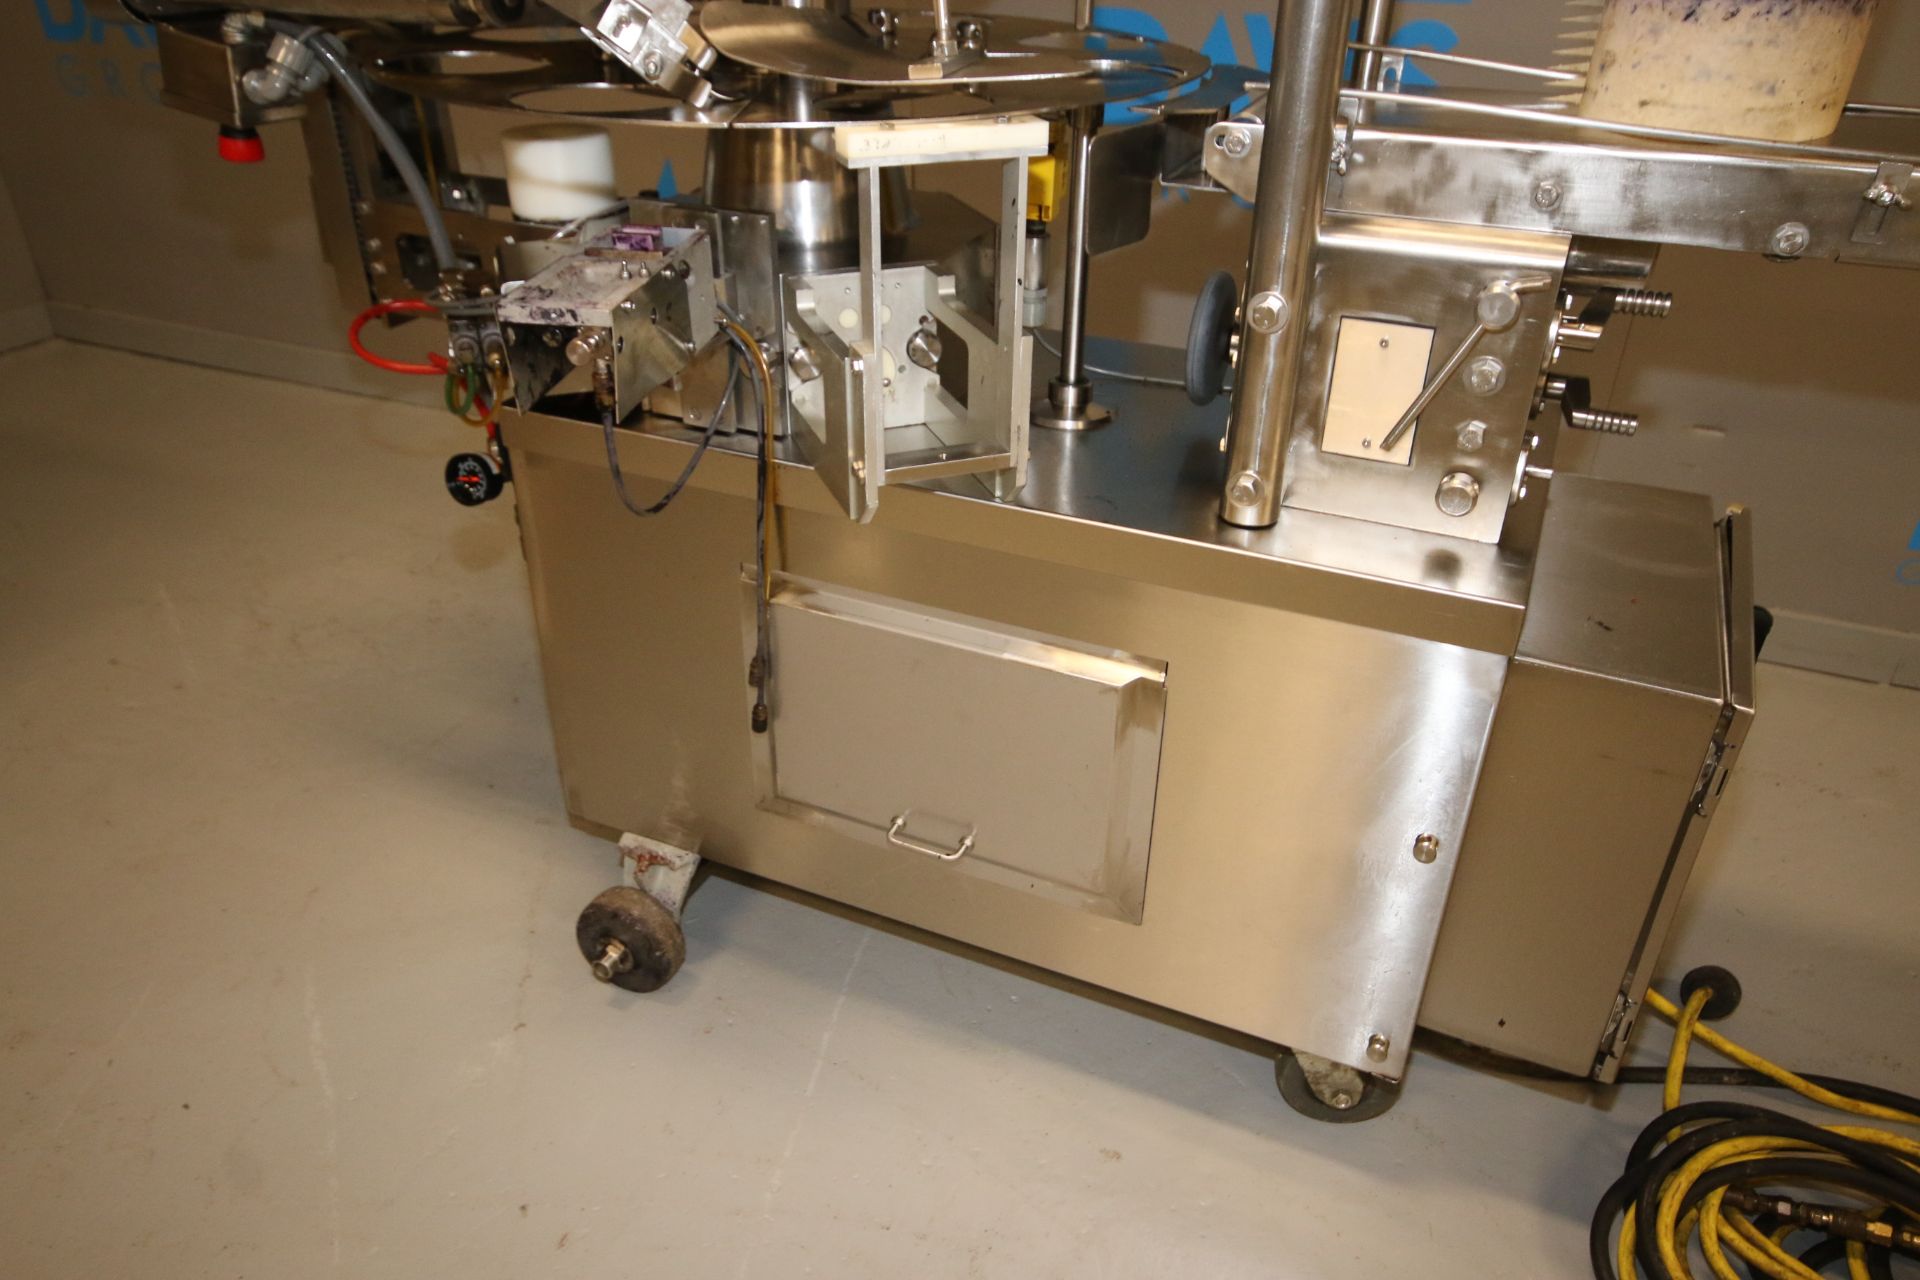 Sweetheart Cup. Co. / Flexefill 8 - Station Rotary S/S Cup Sealer, S/N 23-02, Set - Up with 5.5" - Image 5 of 12